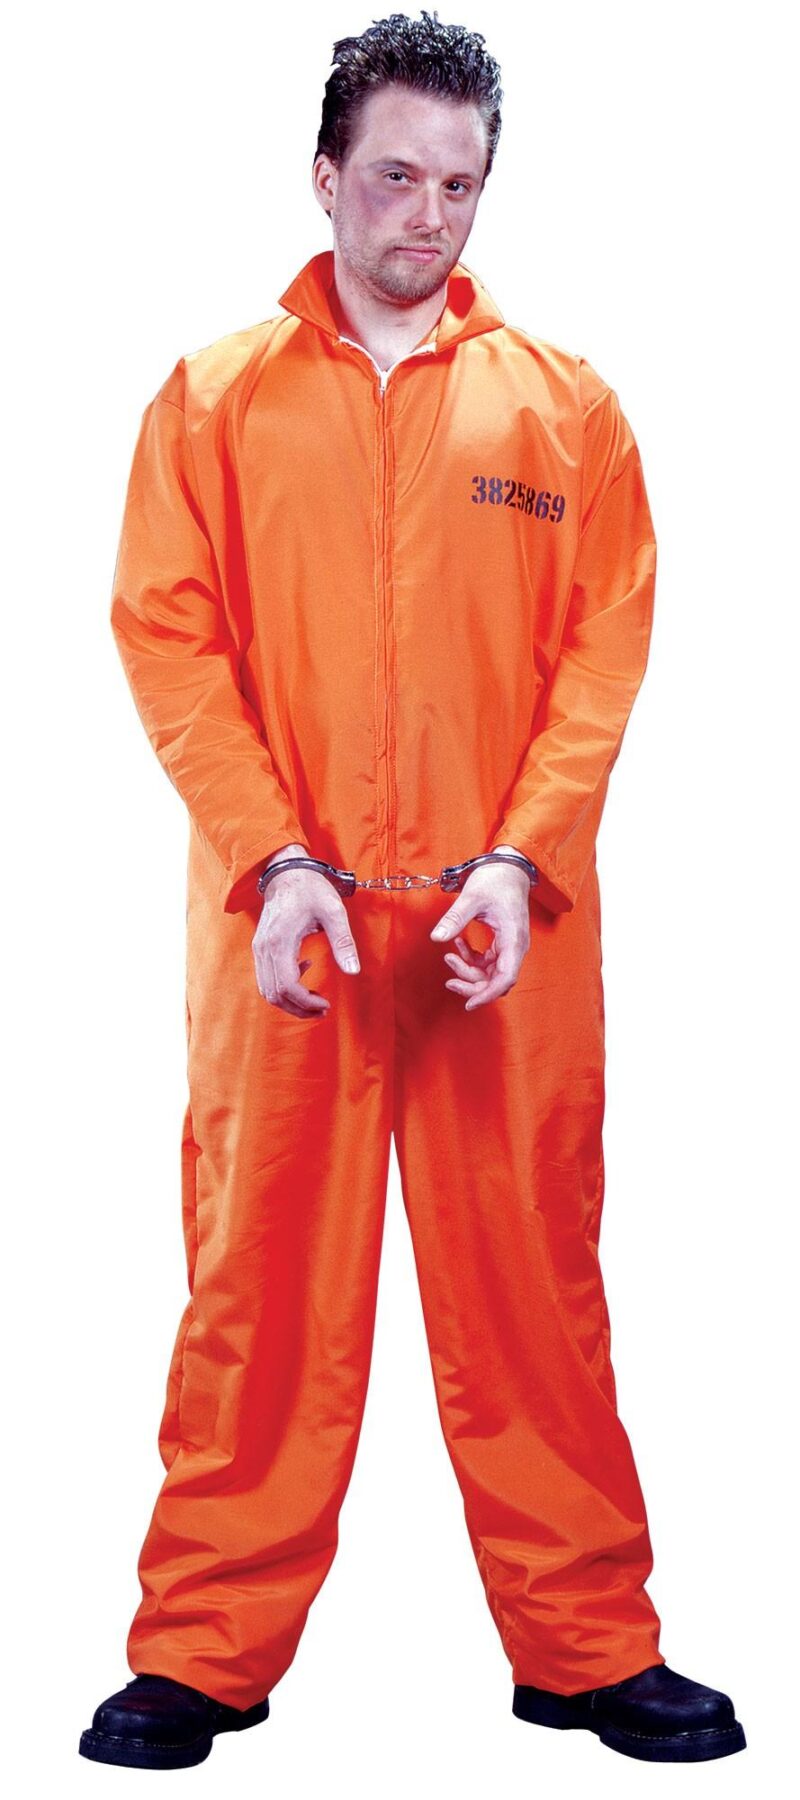 Got Busted Costume